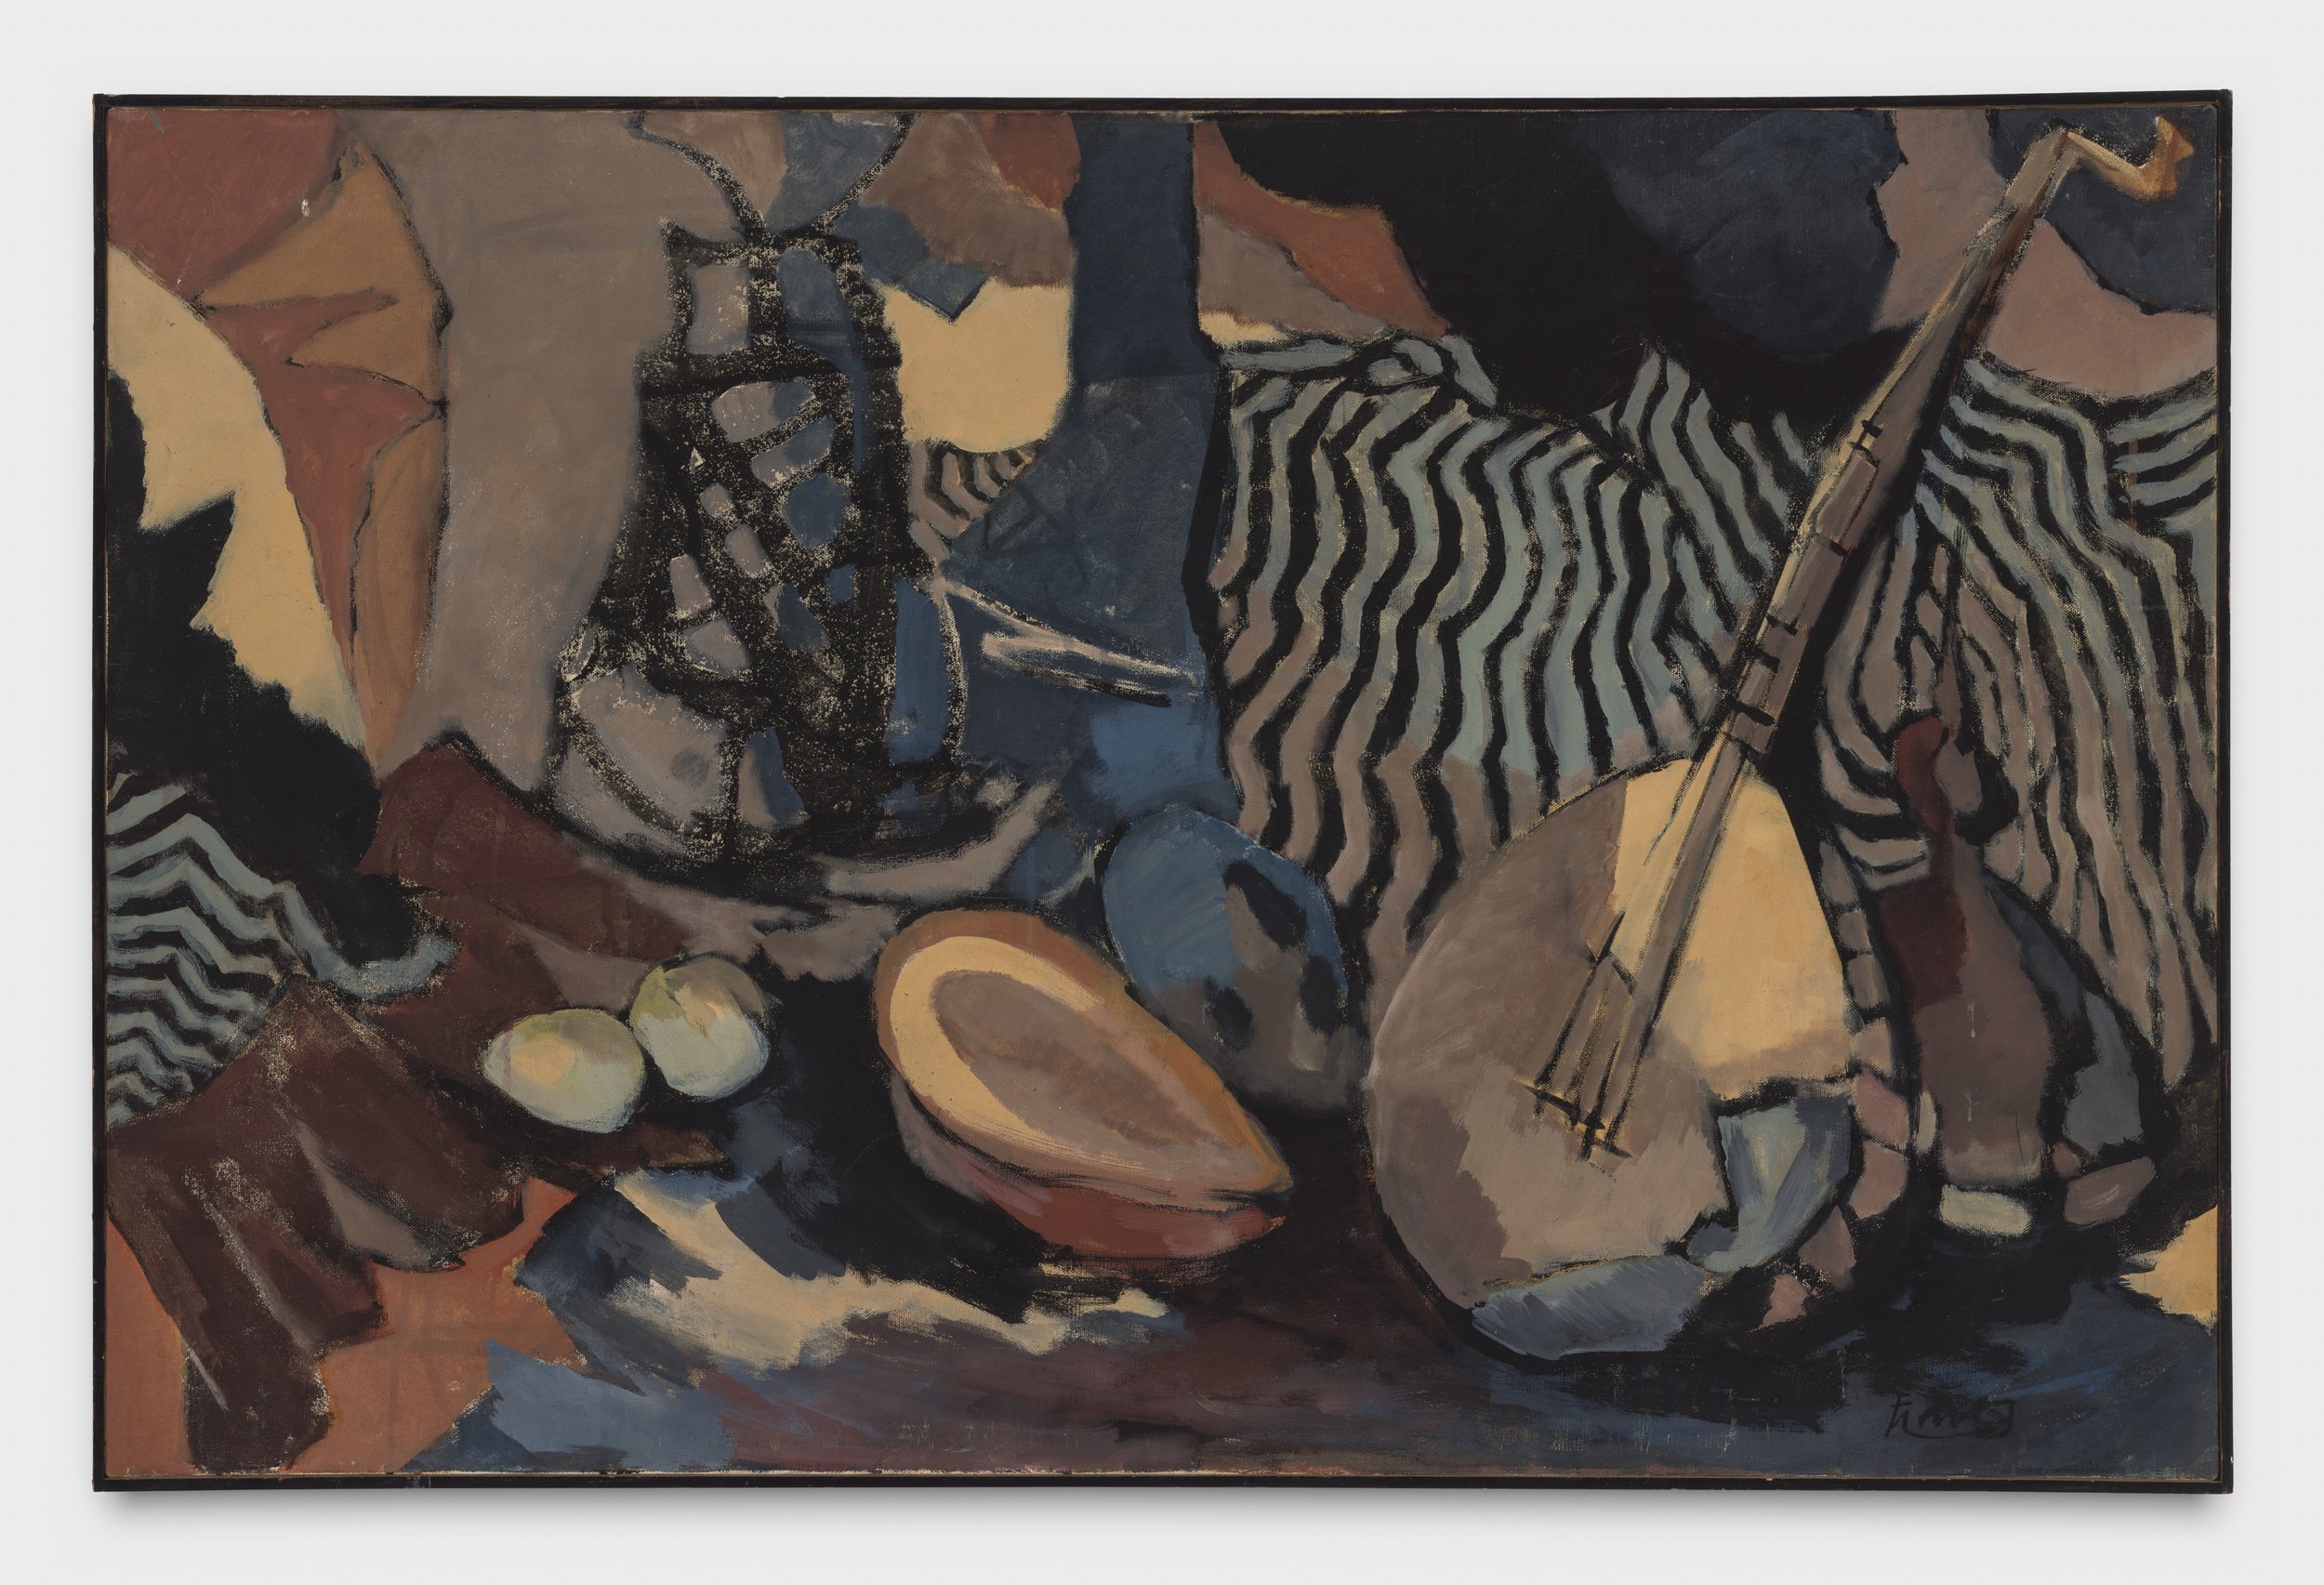  C. C. Wang,  Still Life , 1956. Casein on canvas, 26 x 40 inches (66 x 101.6 cm). Private Collection, New York. Image copyright the Estate of C.C. Wang. Photo: Stan Narten. 